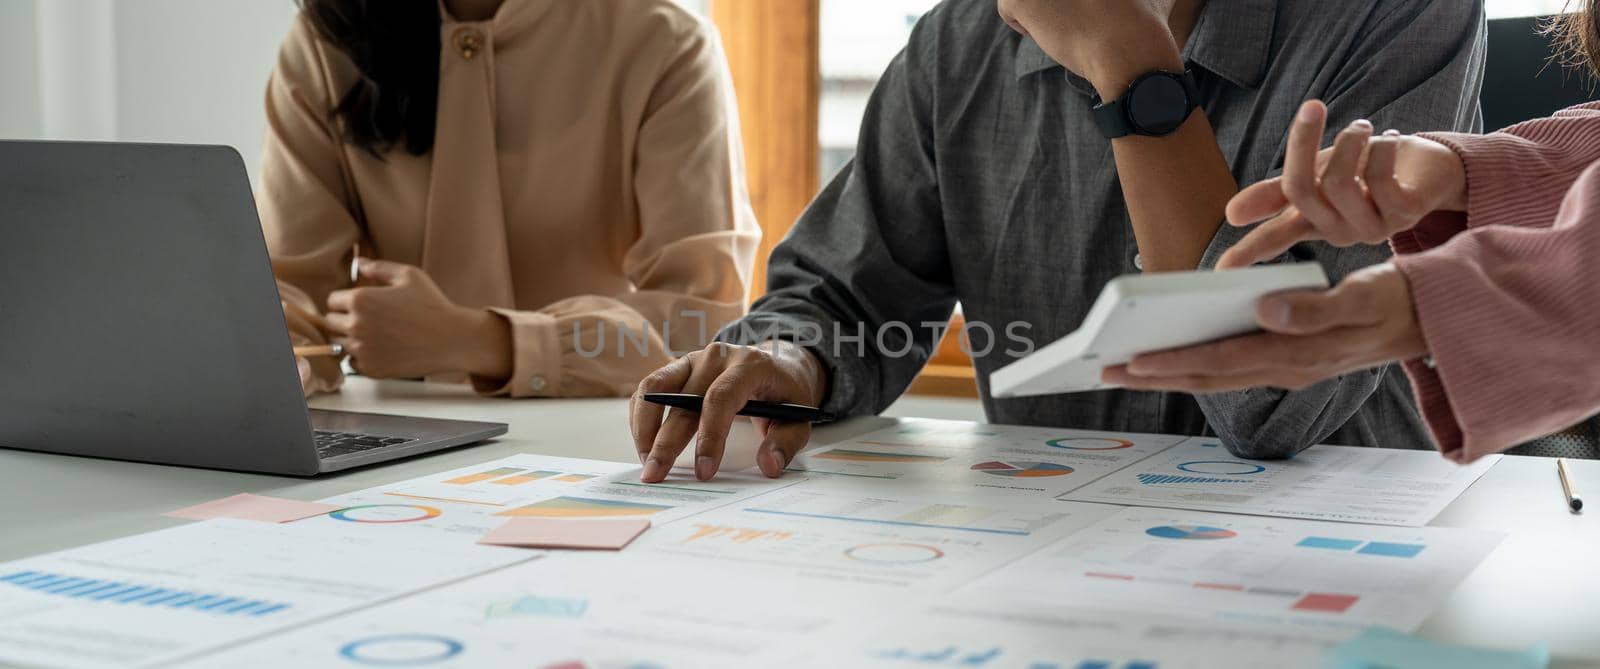 Business People Meeting Design Ideas Concept. Group of Investor diverse brainstorm and pointing at laptop computer on wooden desk